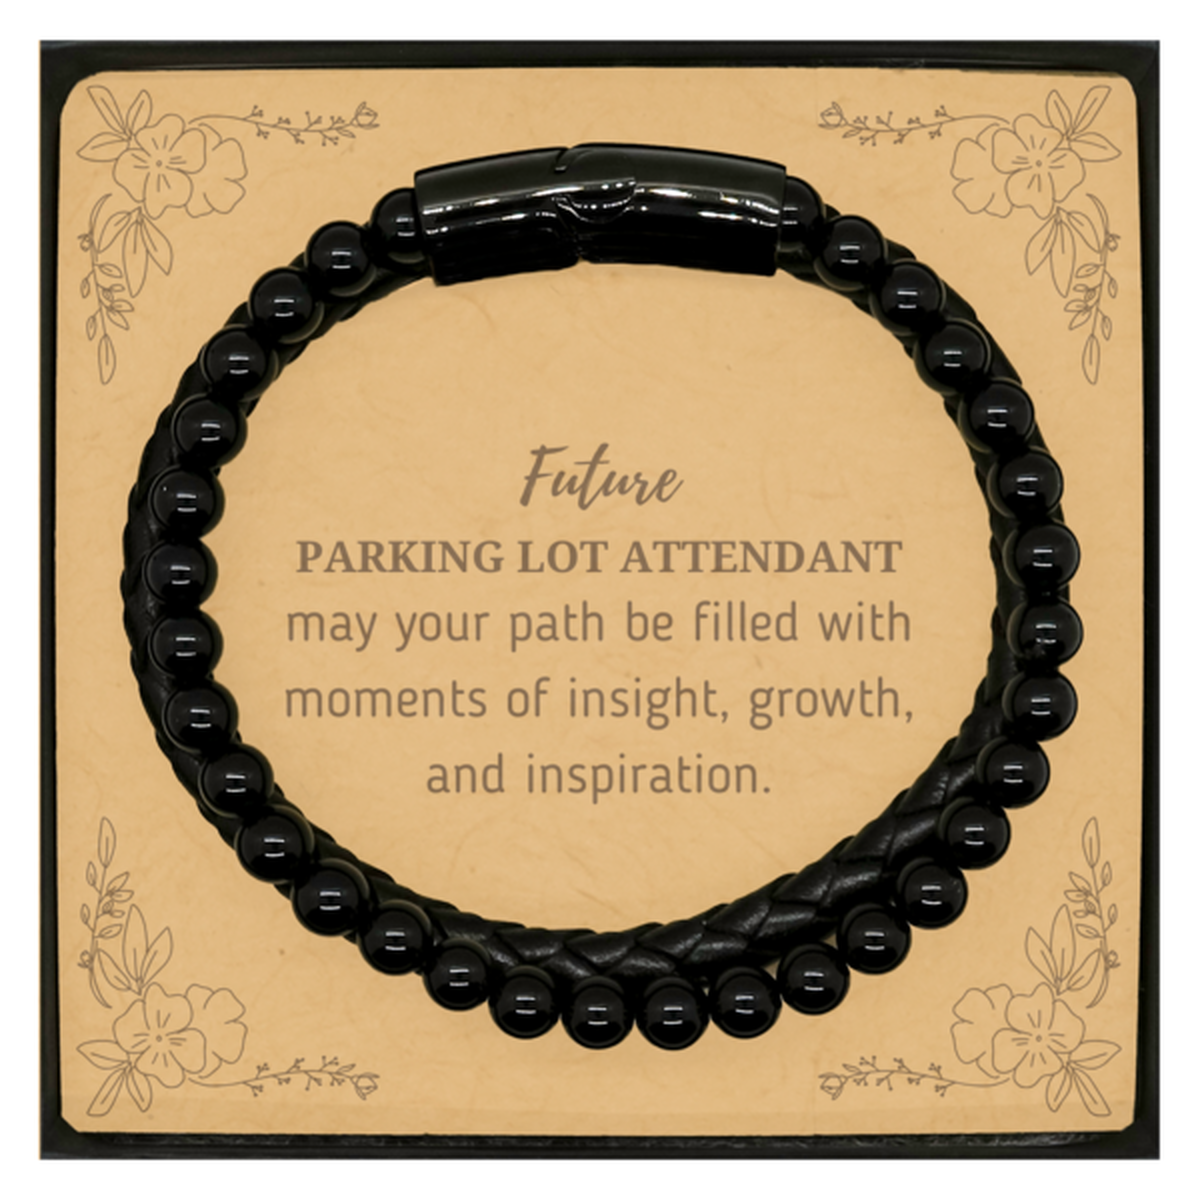 Future Parking Lot Attendant Gifts, May your path be filled with moments of insight, Graduation Gifts for New Parking Lot Attendant, Christmas Unique Stone Leather Bracelets For Men, Women, Friends